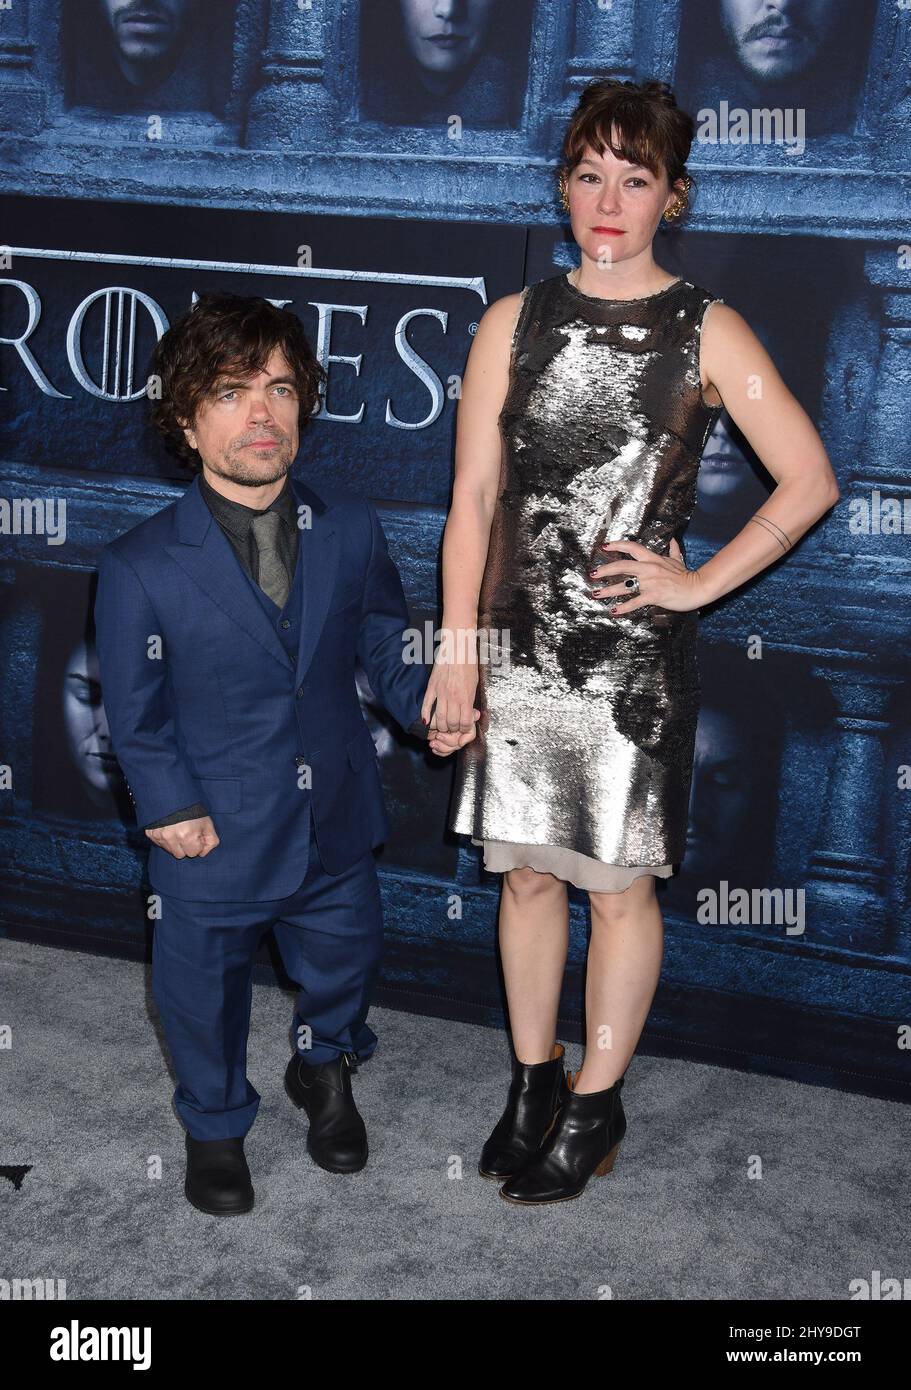 Peter Dinklage and Erica Schmidt attending HBO's 'Game of Thrones' season 6 premiere held at TCL Chinese Theatre in Los Angeles, USA. Stock Photo